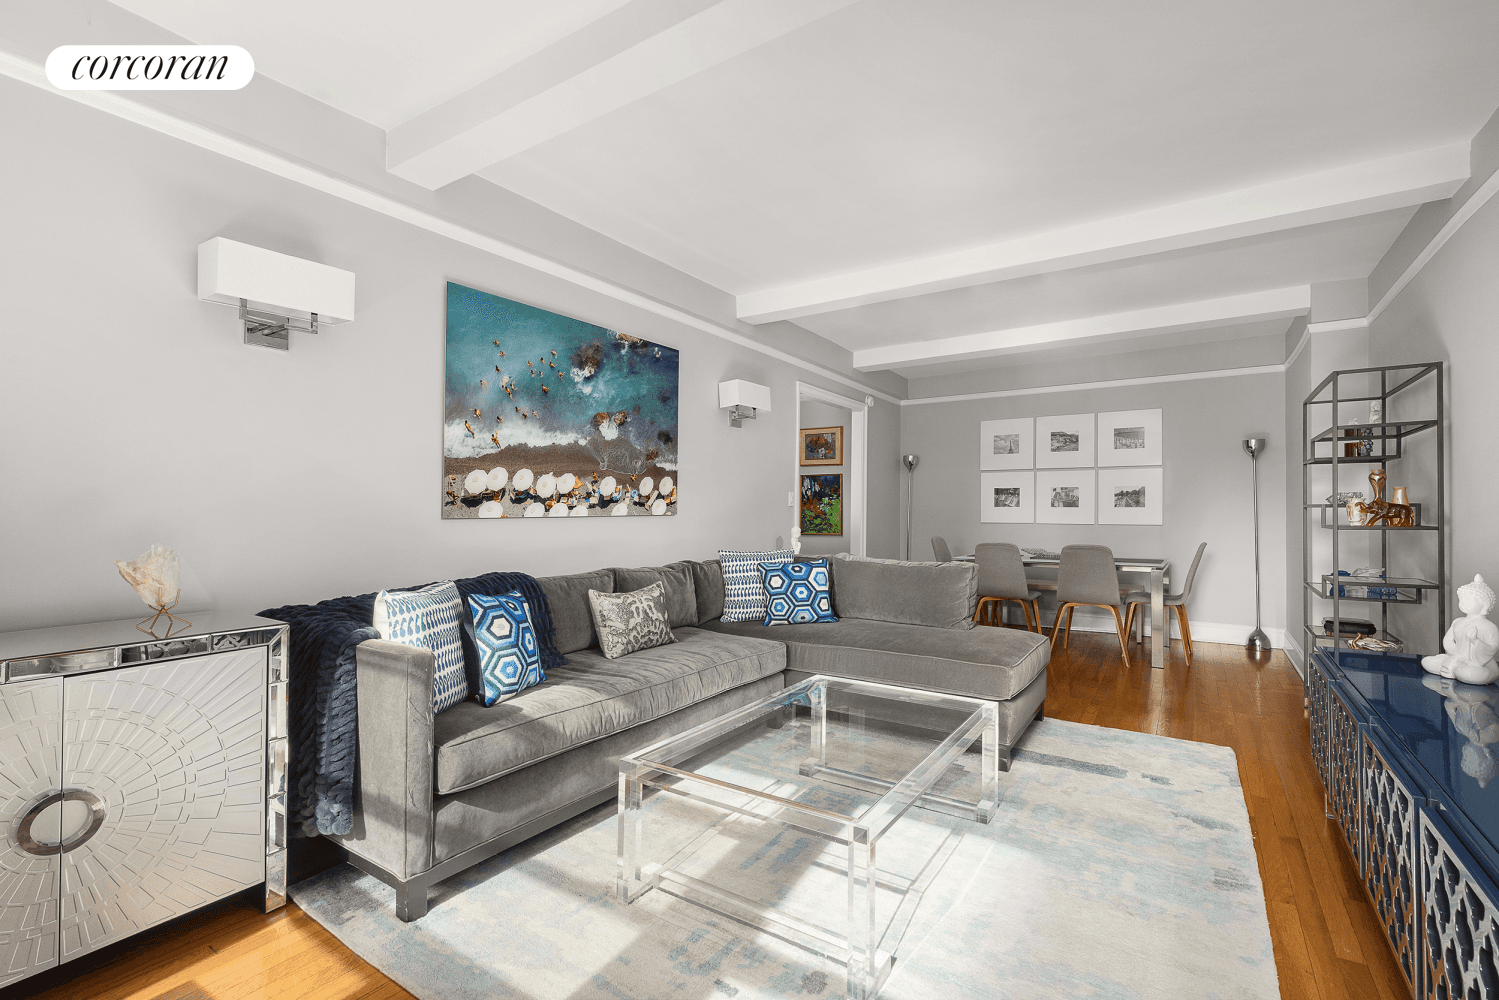 Apartment 11B at 205 East 78th Street is a spacious move in ready 1 bedroom and1 bath apartment in a desirable Upper East Side cooperative.